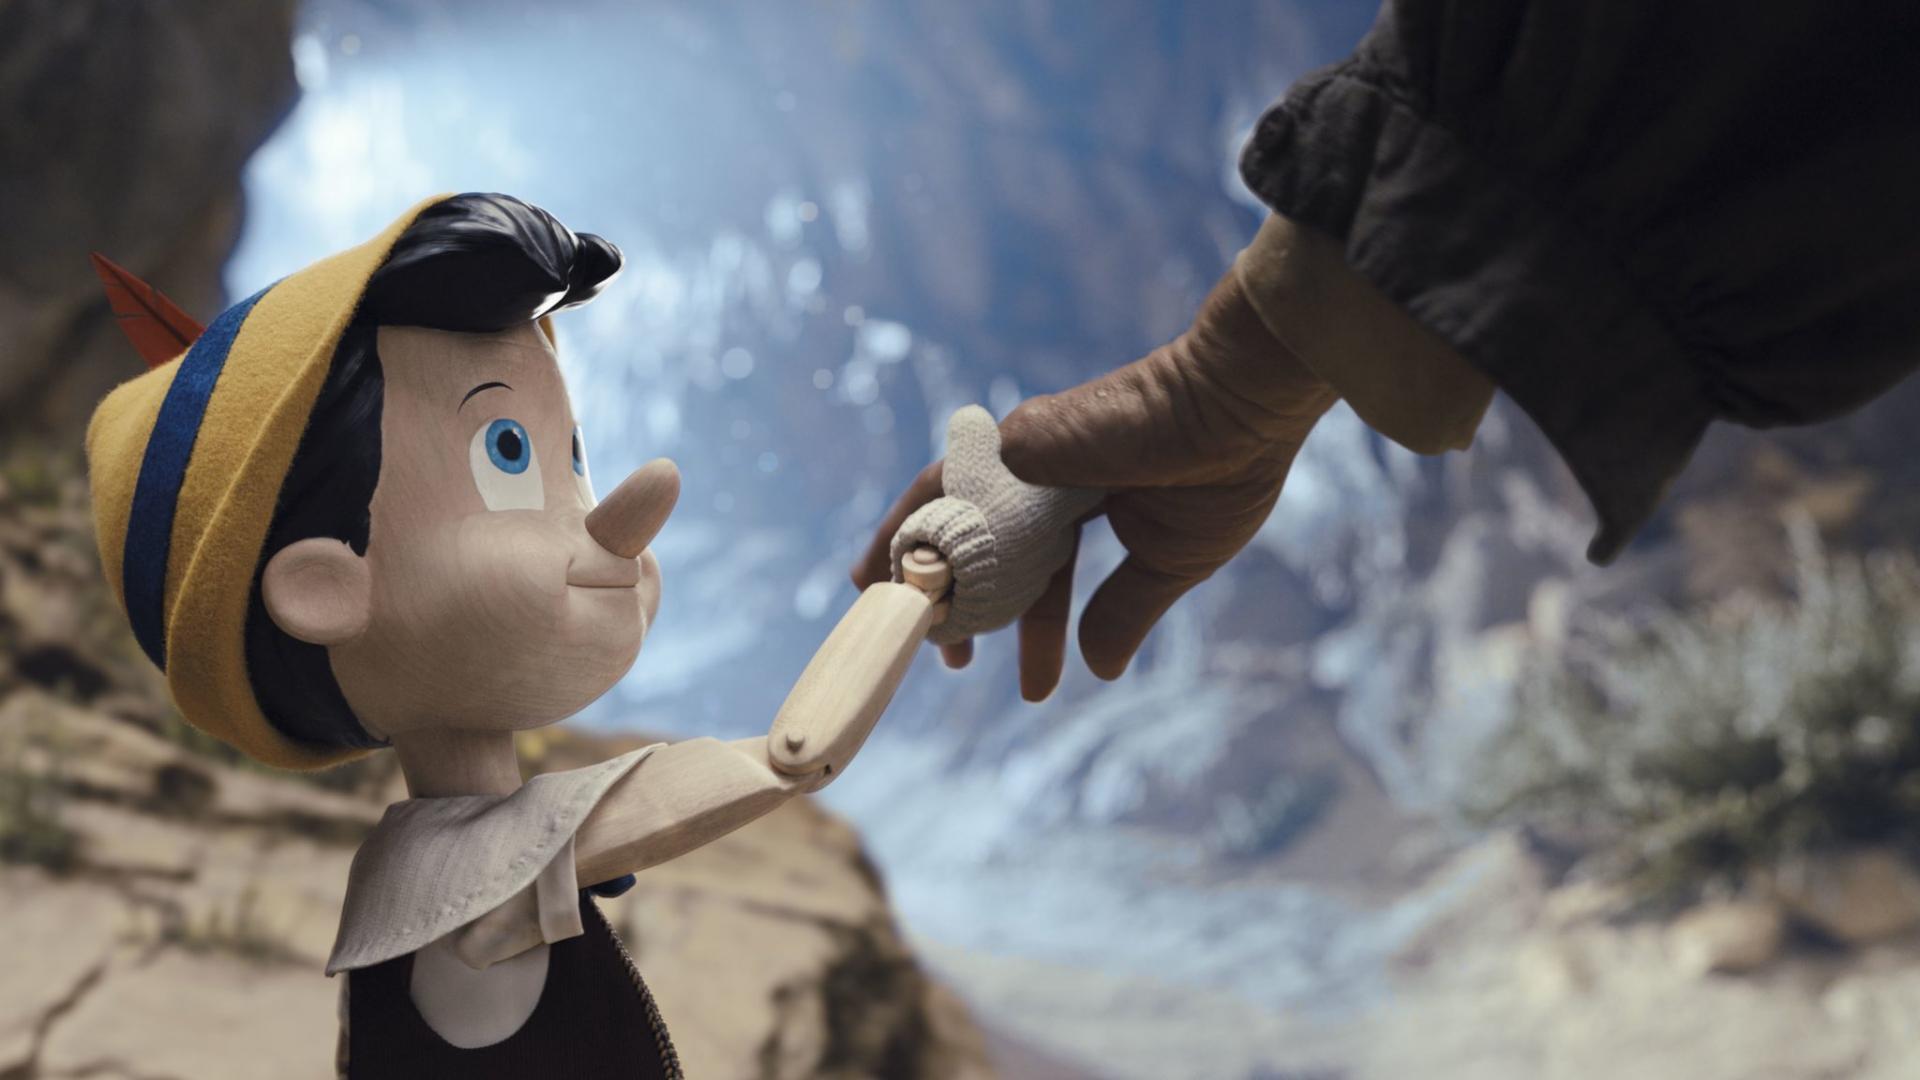 Image gallery for Pinocchio (2022) - Filmaffinity